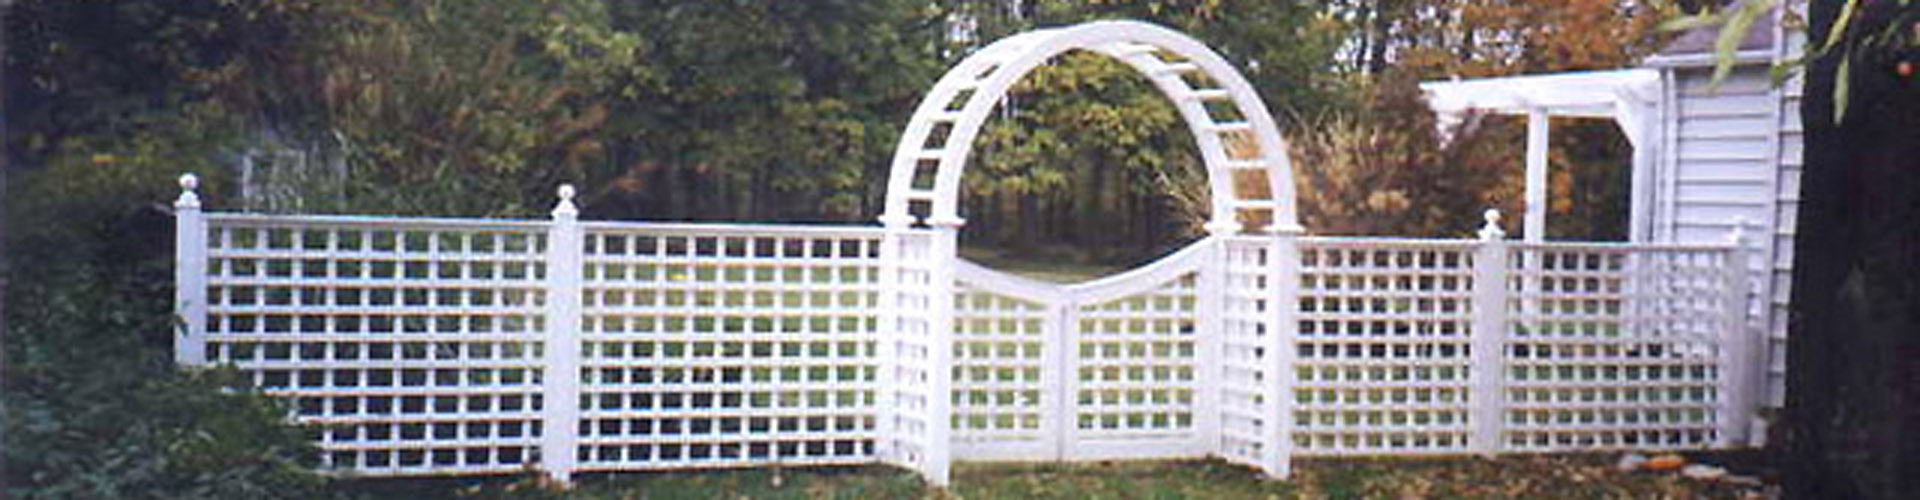 Square Lattice Fencing with an arbor by Elyria Fence